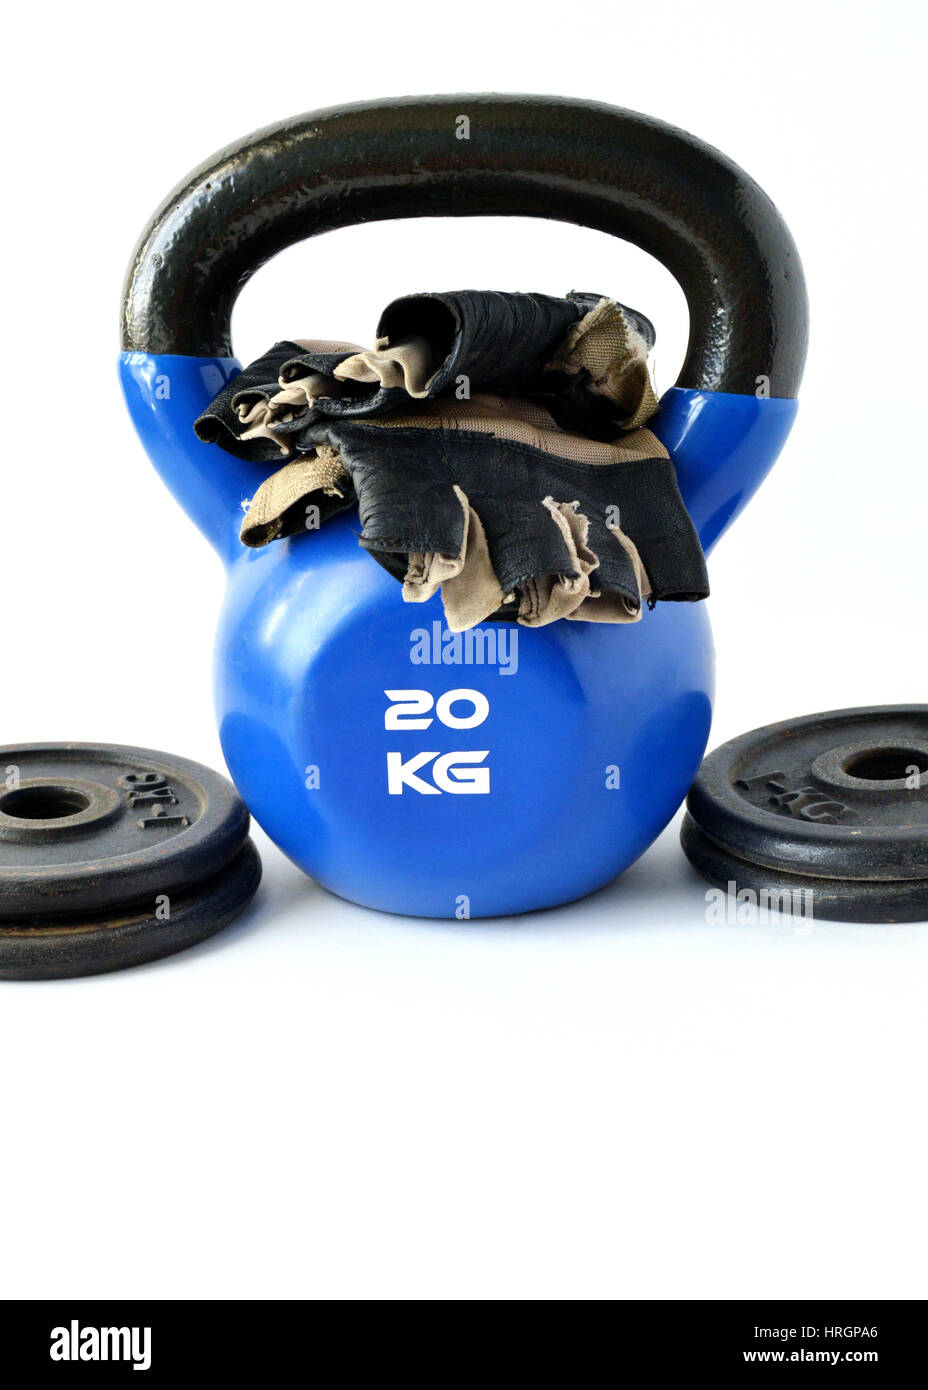 Tools for bodybuilding, fitness and crossfit. Weight, glove and kettlebell. Stock Photo